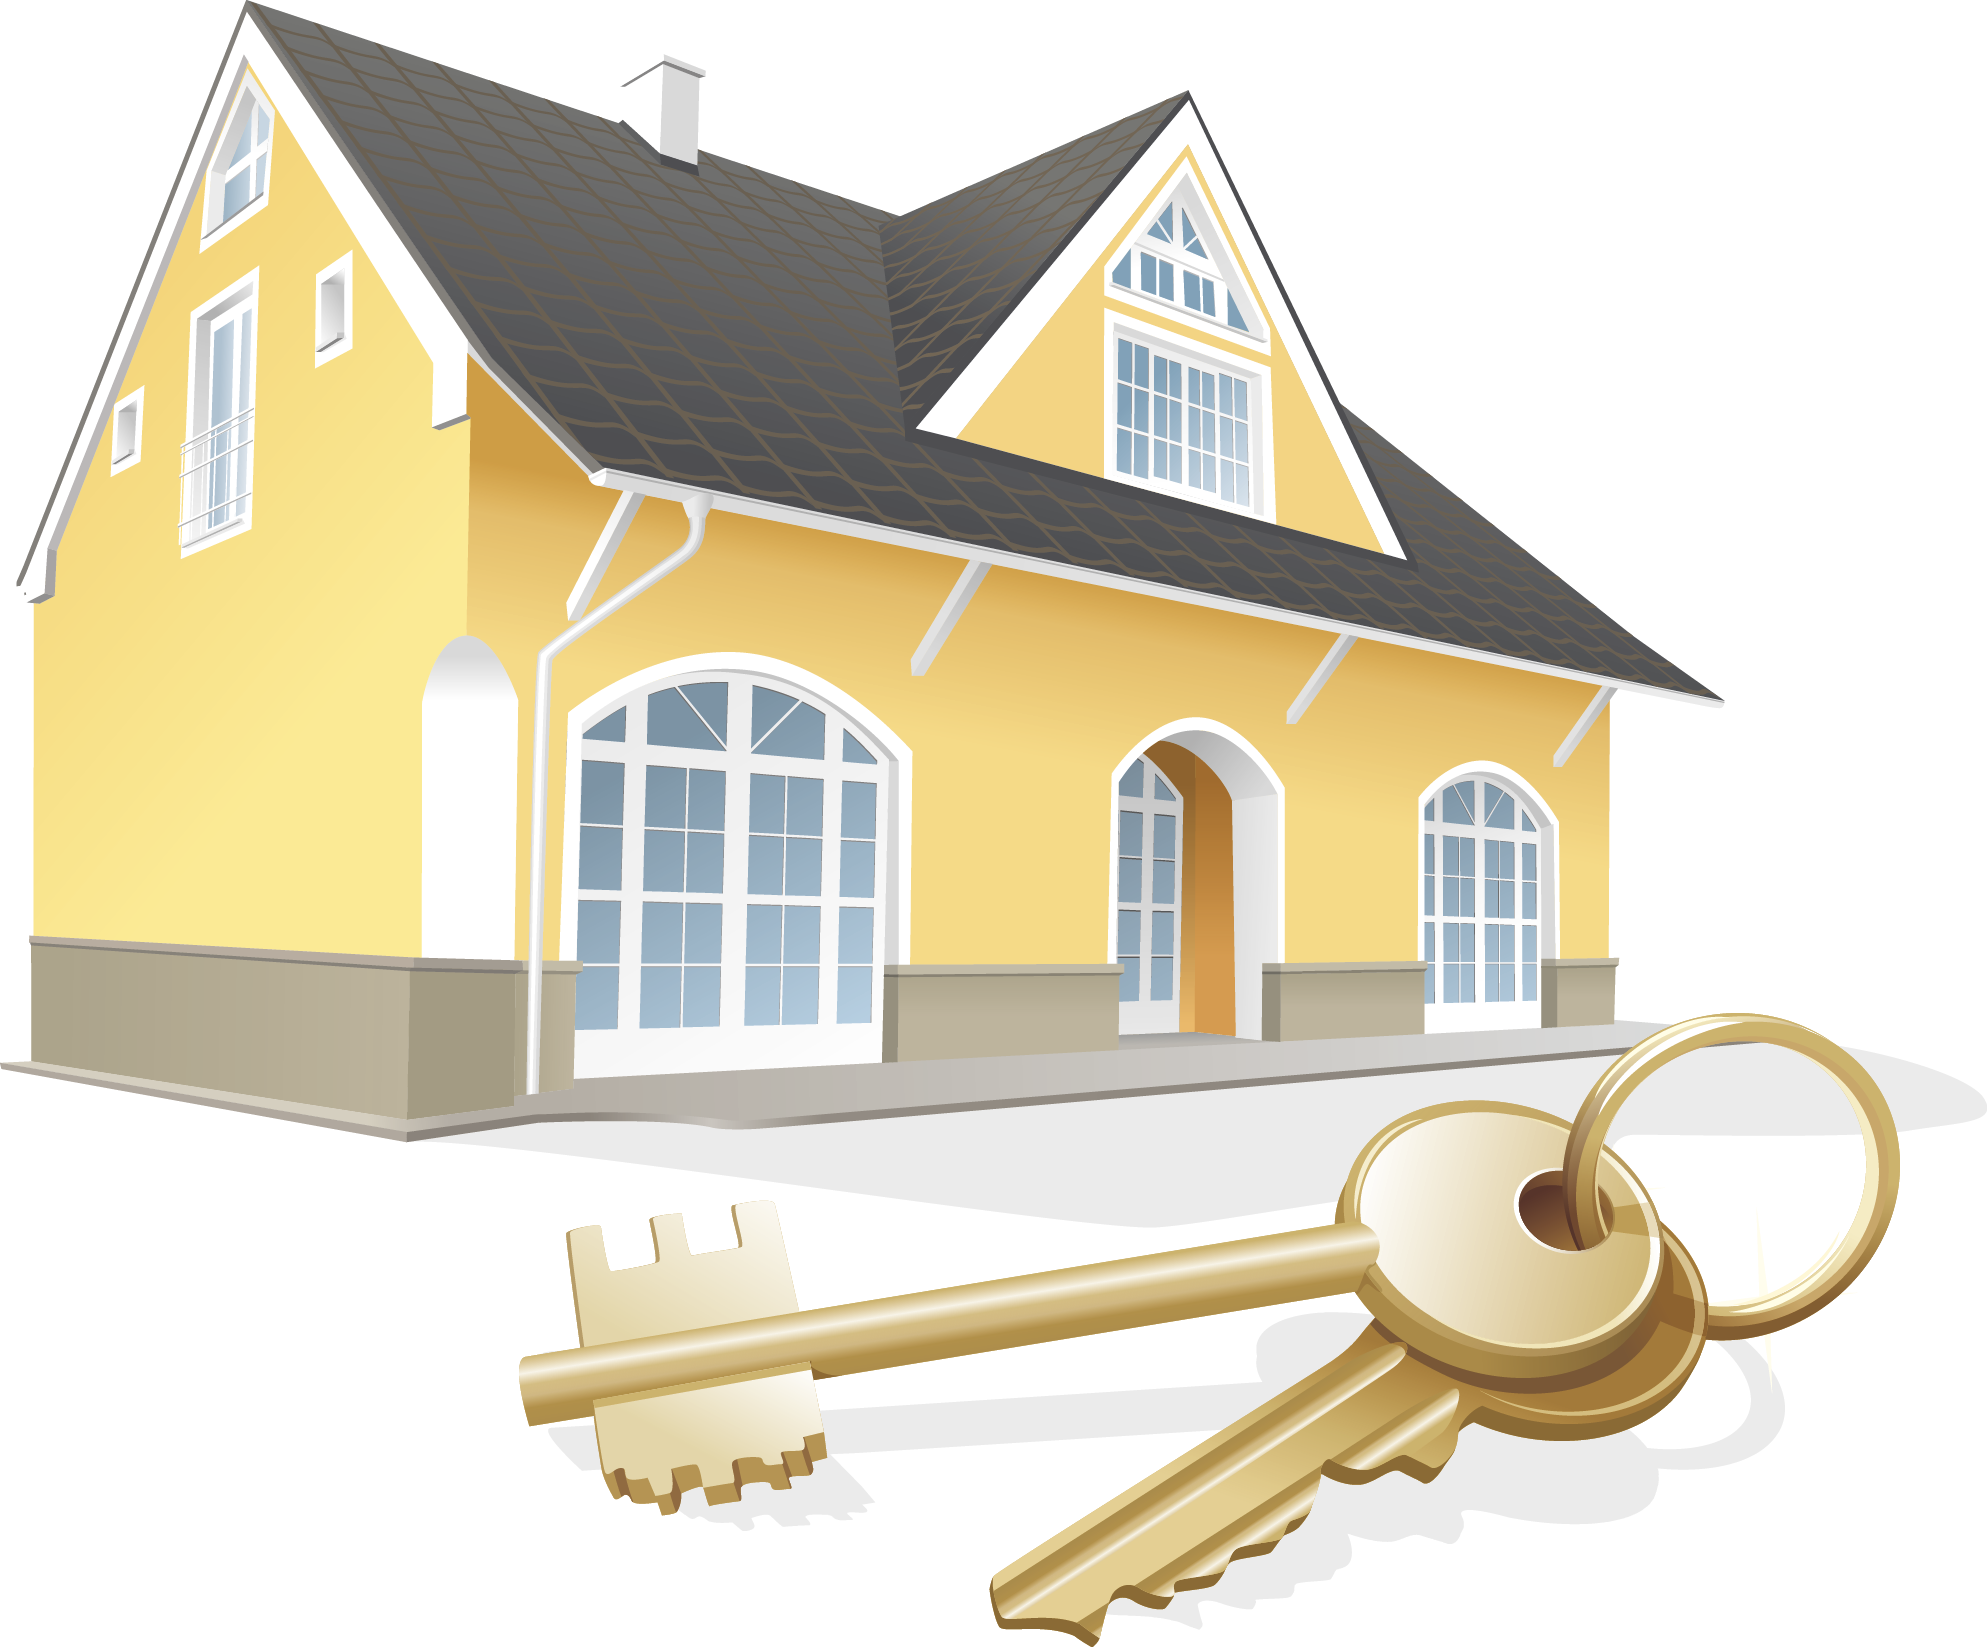 House Houses Home Free Transparent Image HQ Clipart